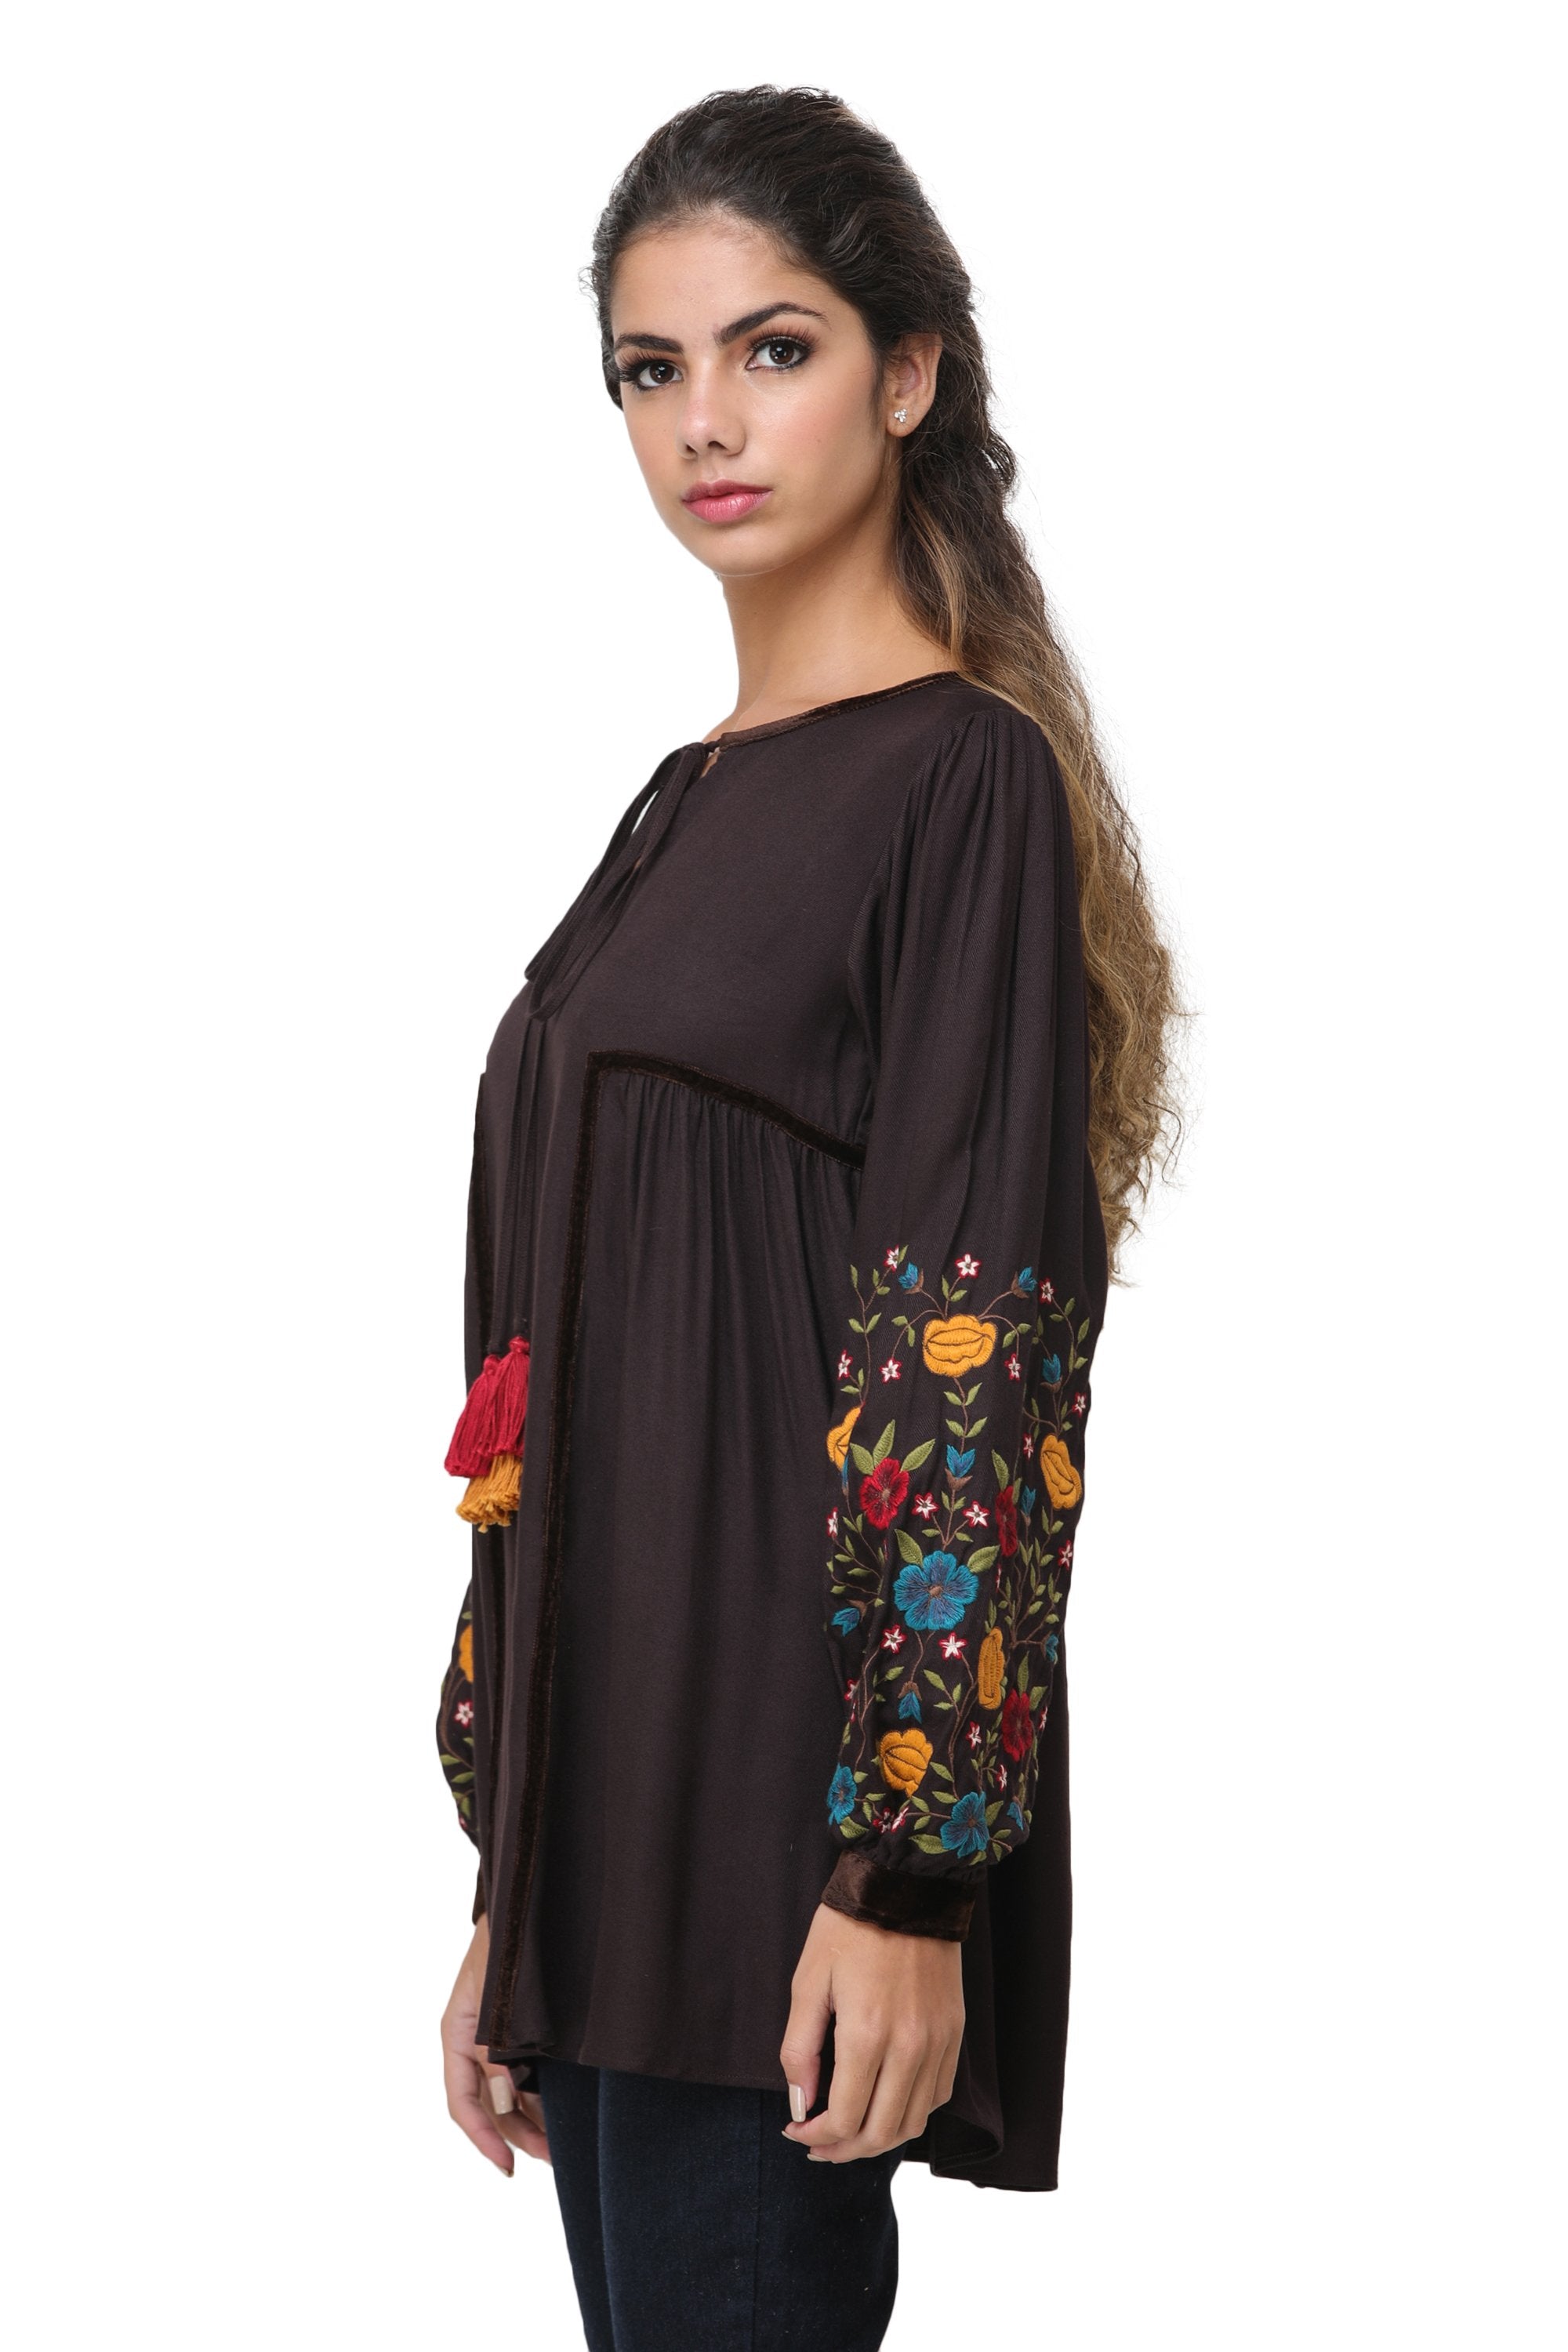 Pinnacle By Shruti Sancheti - Brown Embroidered Top